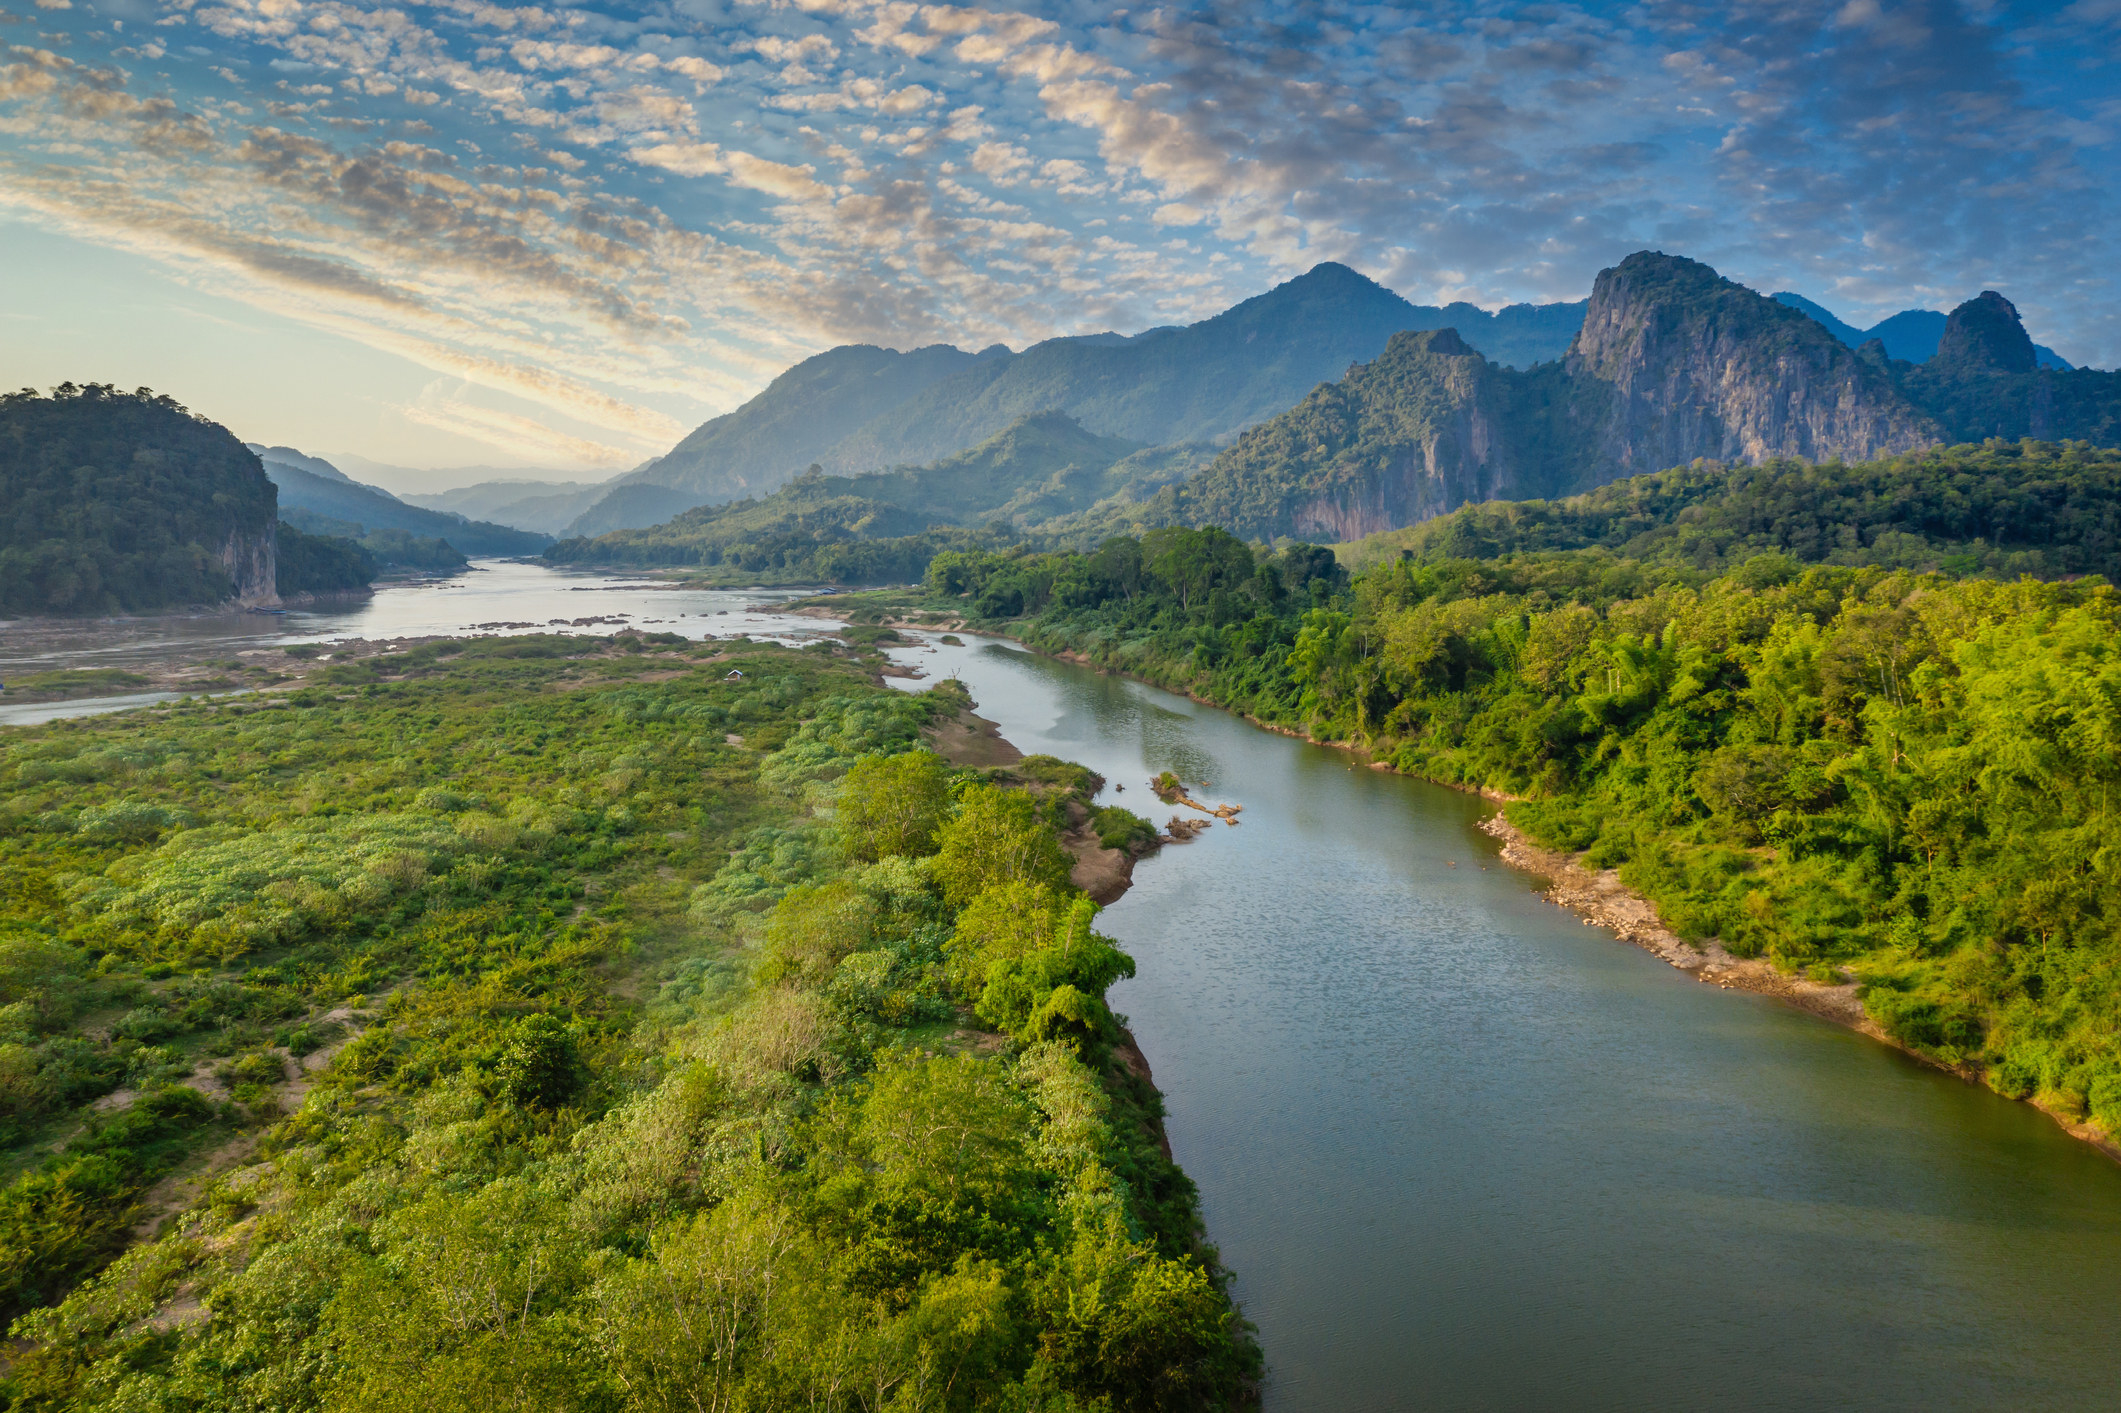 An aerial view of the Mekong River in Laos.